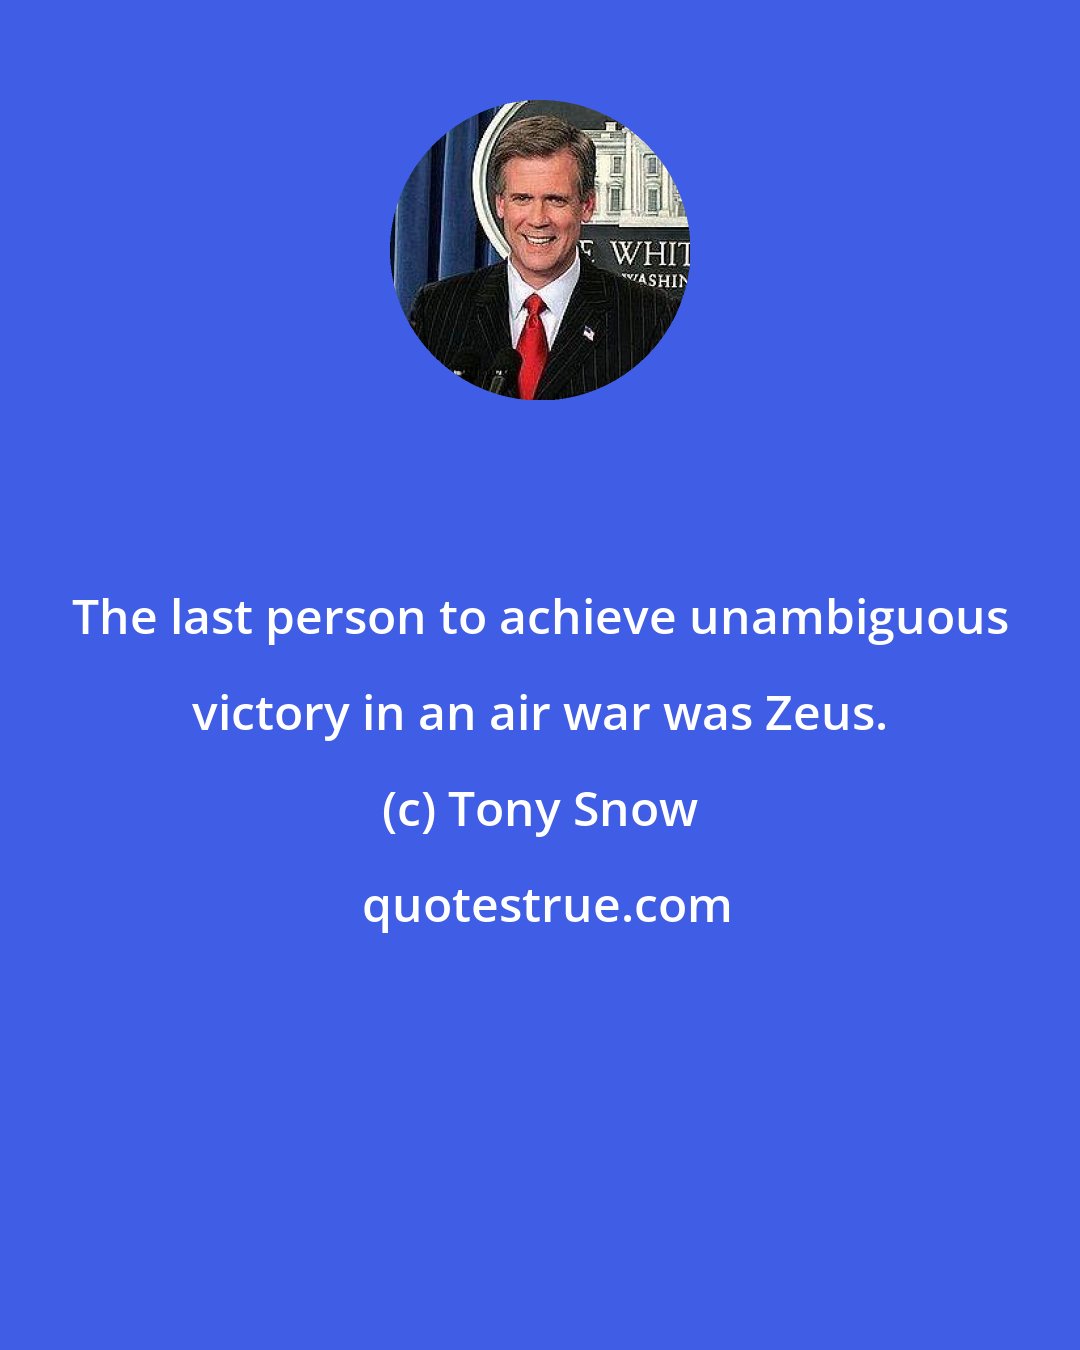 Tony Snow: The last person to achieve unambiguous victory in an air war was Zeus.